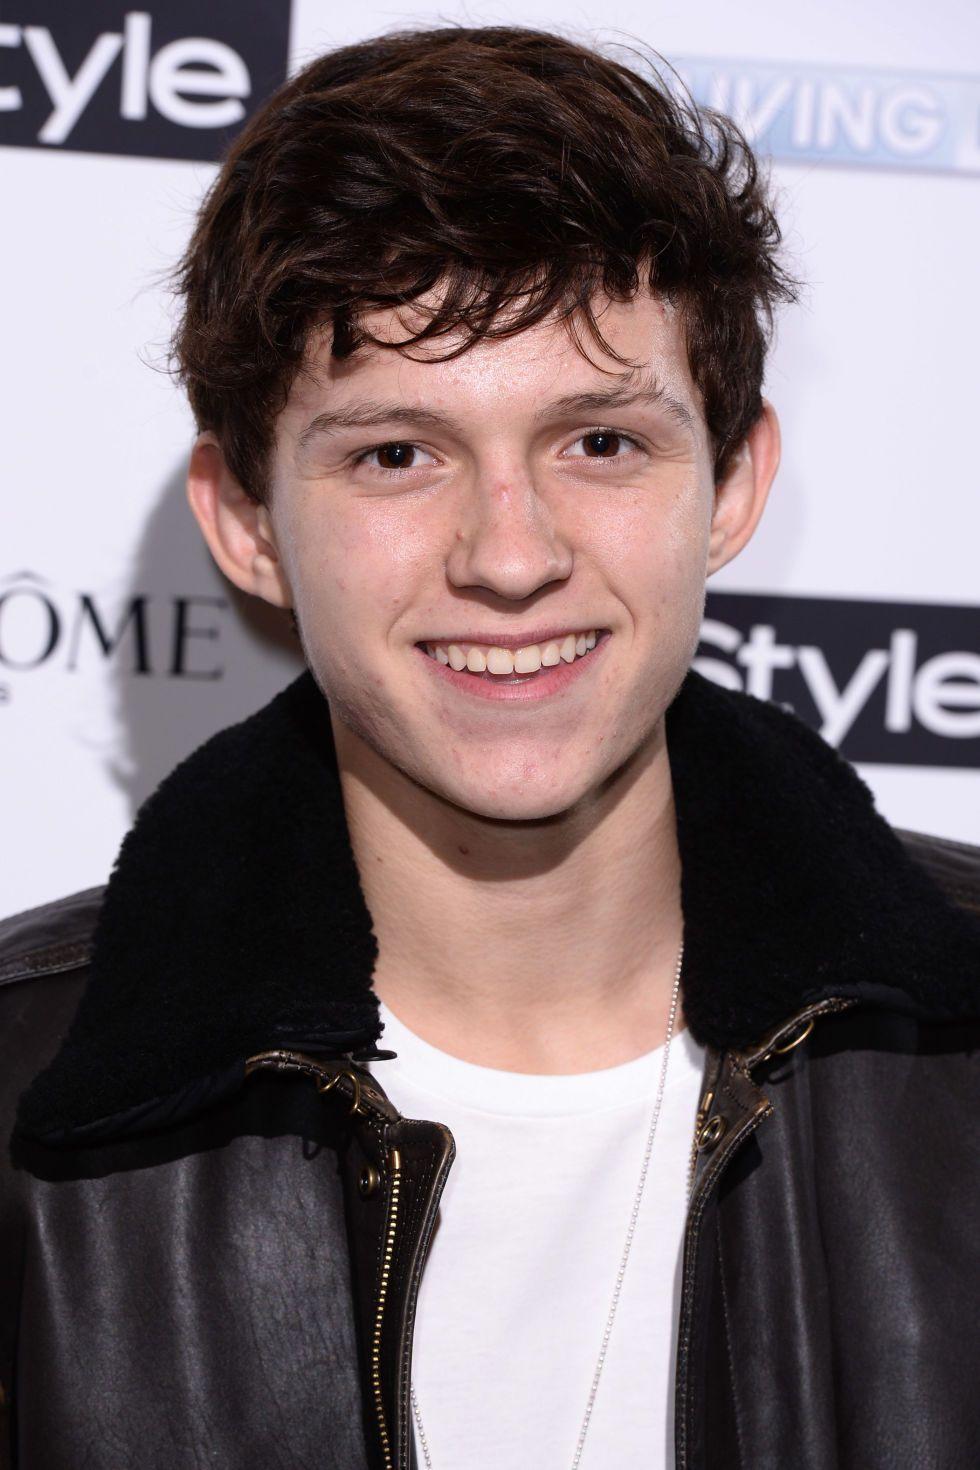 Tom Holland HQ Image. Full HD Picture